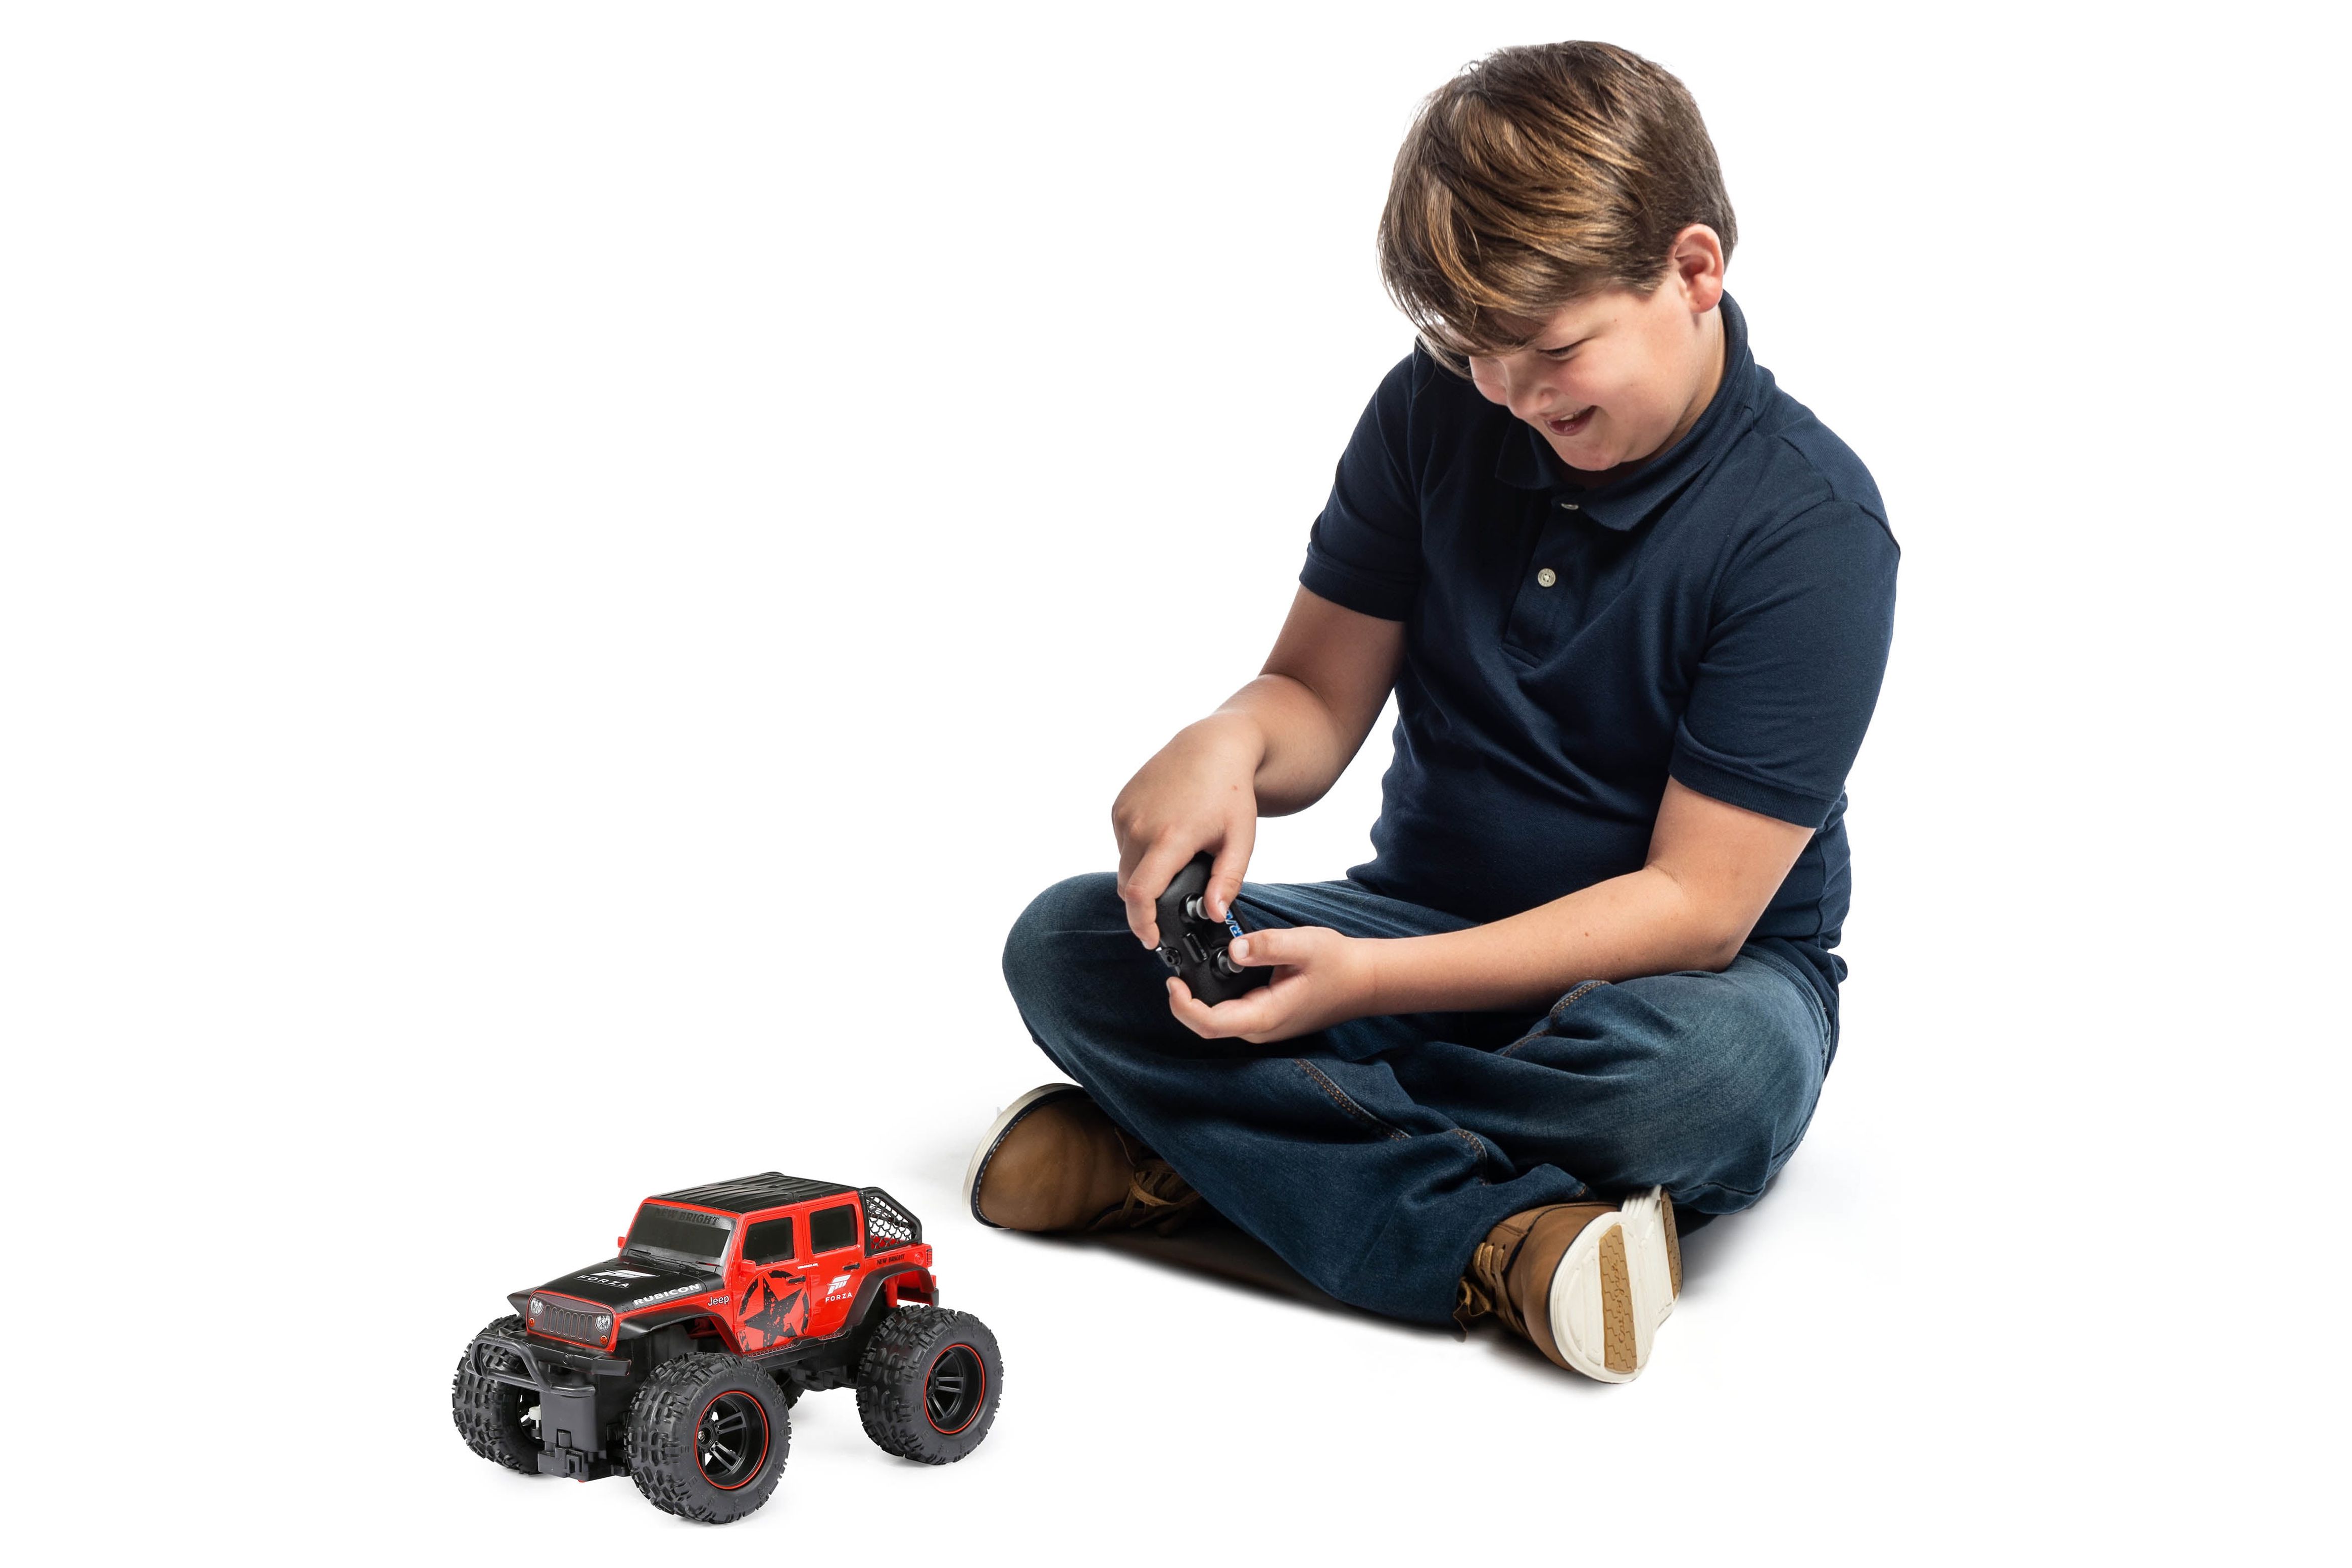 New Bright (1:16) Forza Jeep Wrangler Battery Radio Control Red/Black Truck, 1688UF-4RK - image 5 of 10